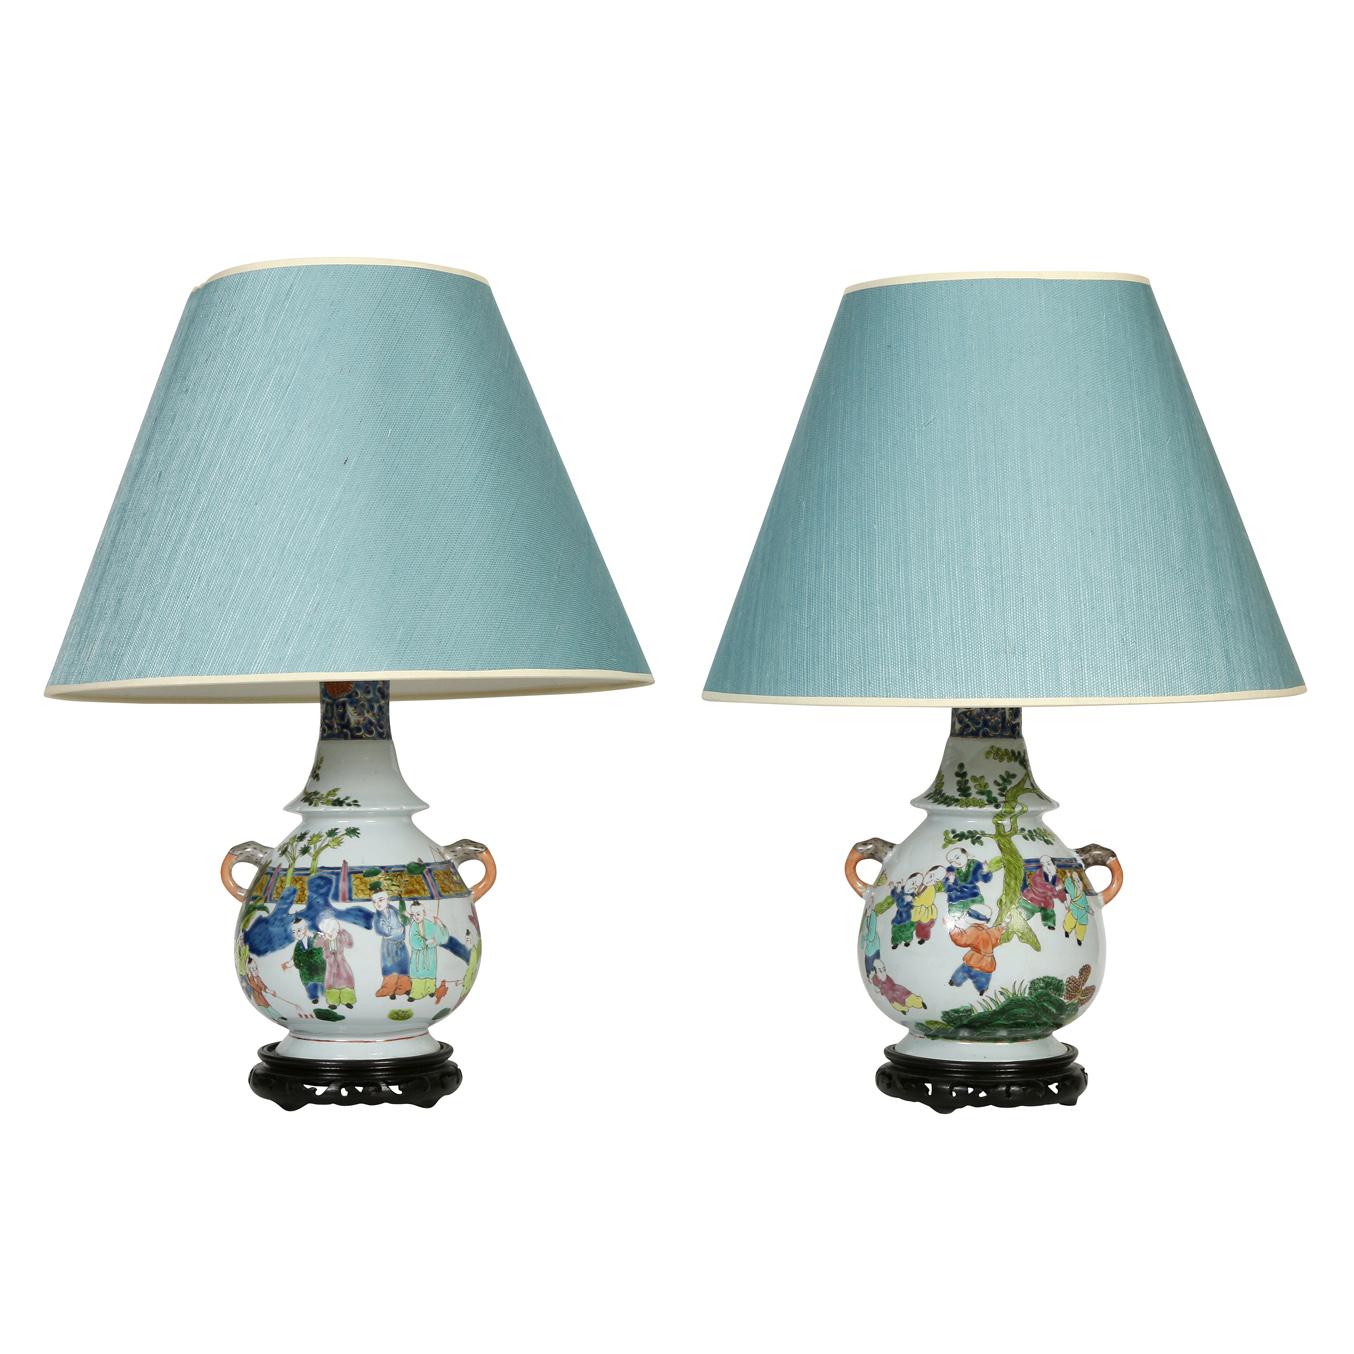 20th Century Pair of Chinese Porcelain Polychrome Lamps